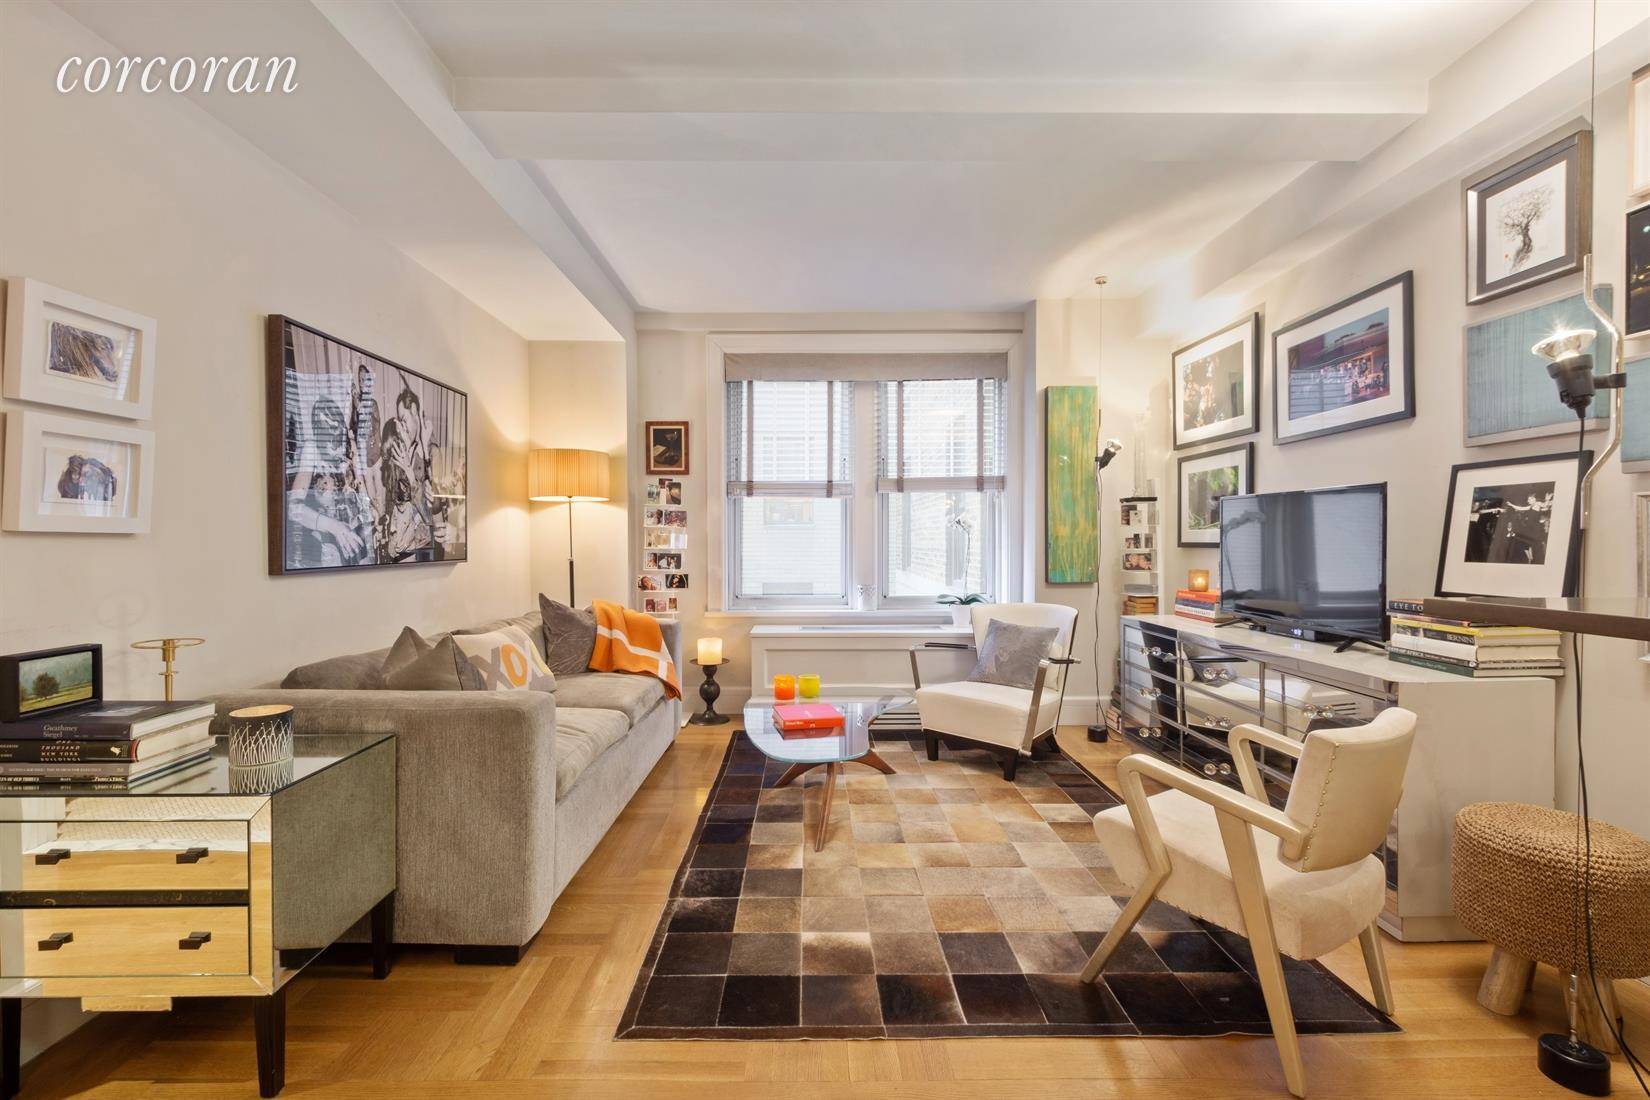 Prewar 1BR Jewell at The OlcottBeautifully renovated home with a warm and inviting layout perfect for entertaining, or a quiet respite after a long day.